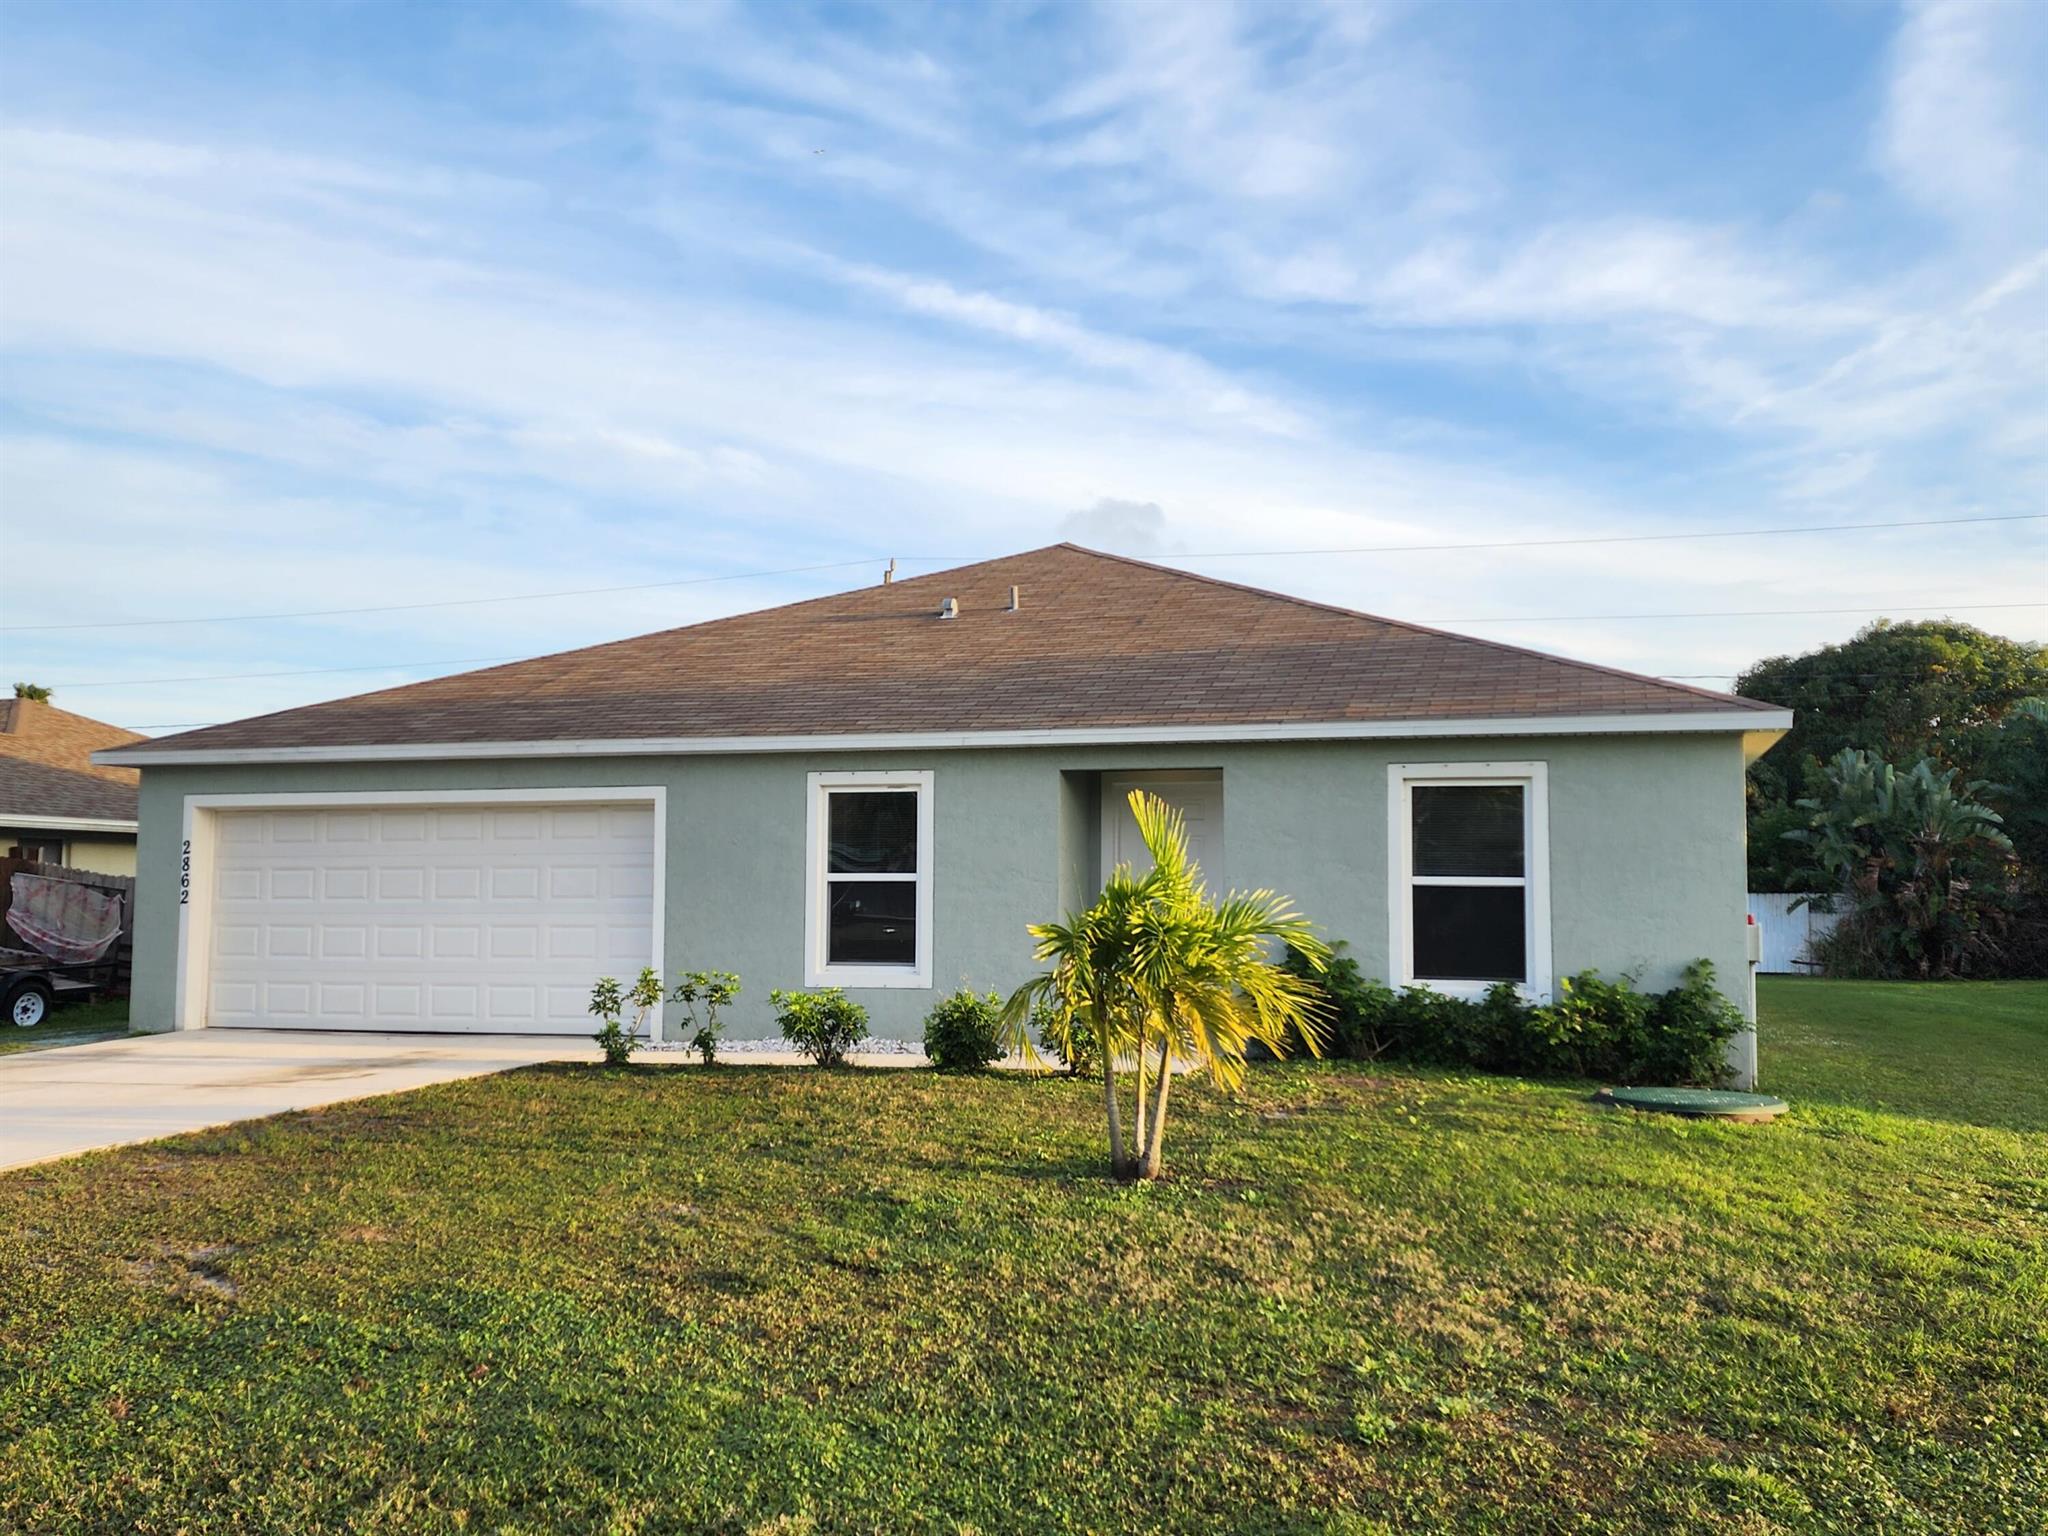 View Port St Lucie, FL 34952 house